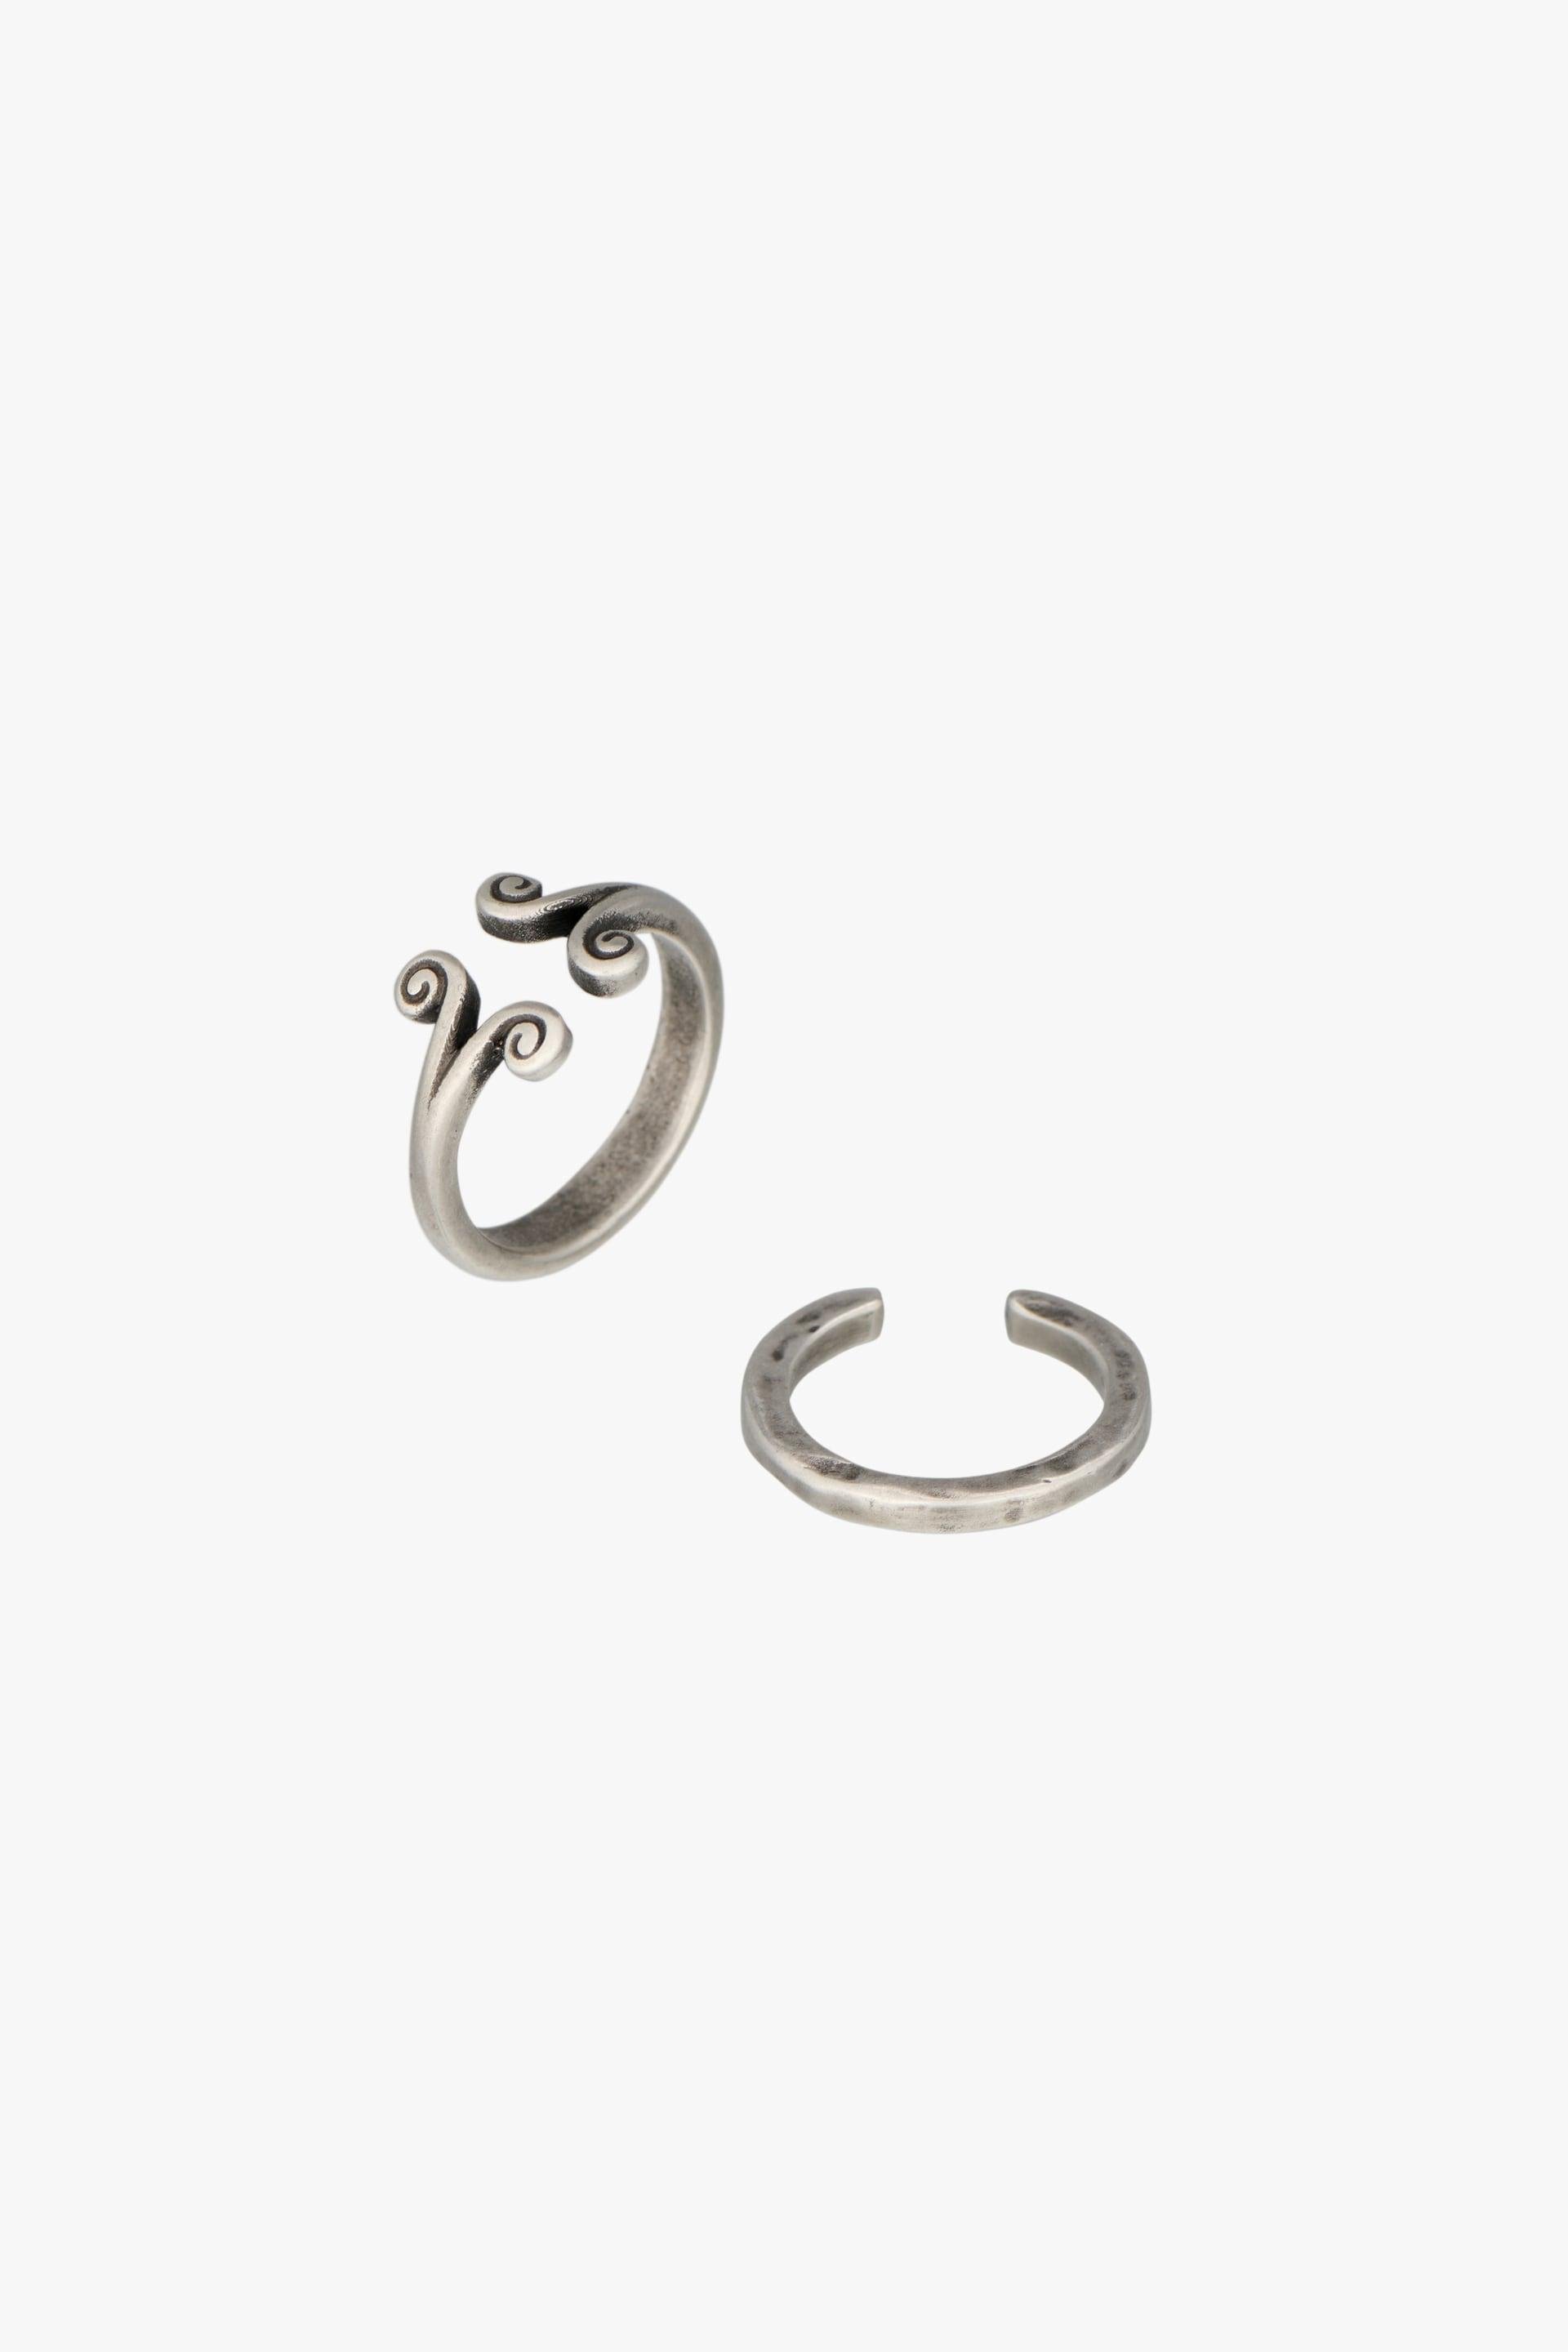 2 PACK OF METAL RINGS LIMITED EDITION by ZARA